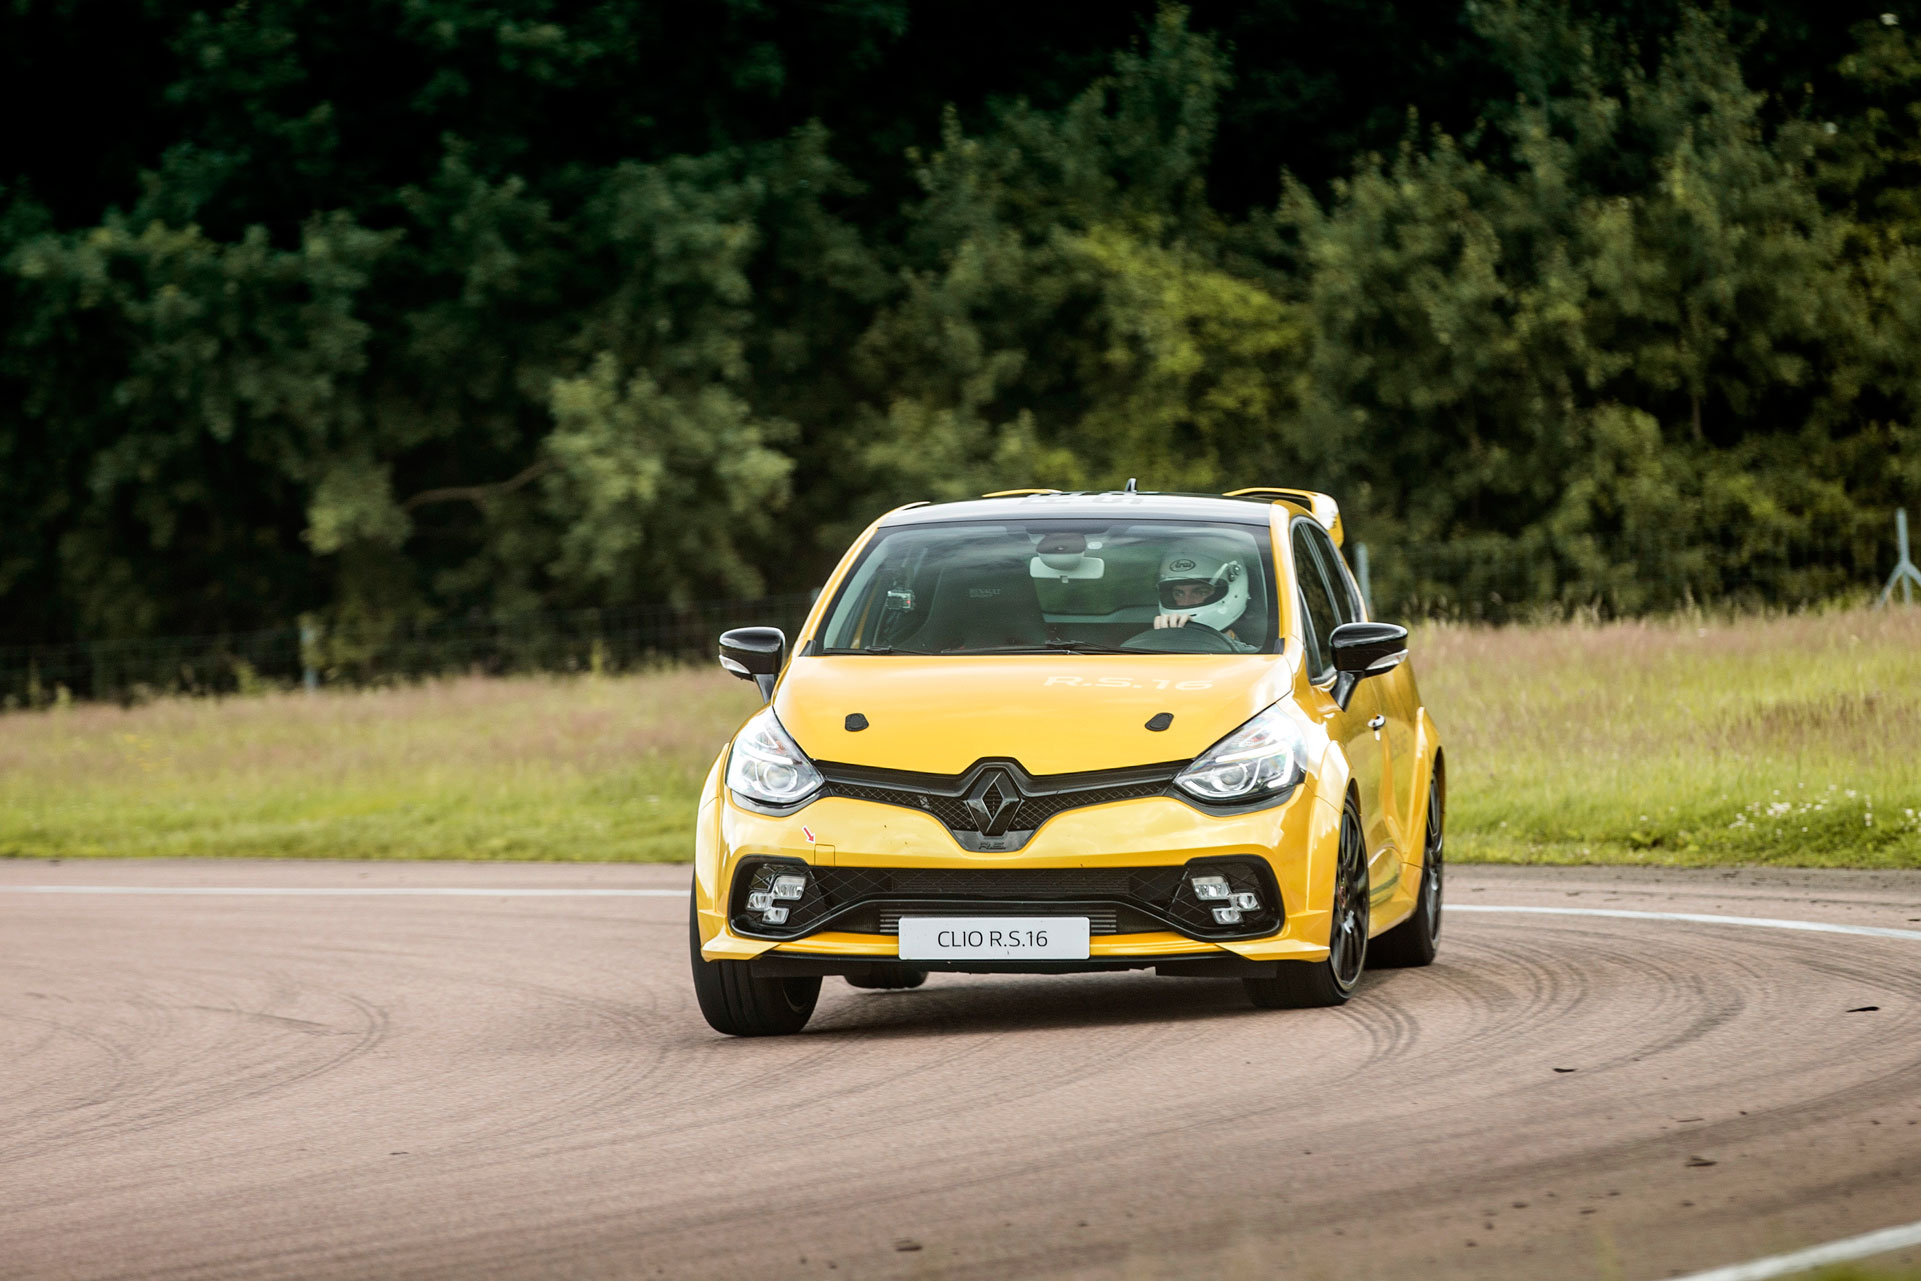 Speed dating renault clio rs